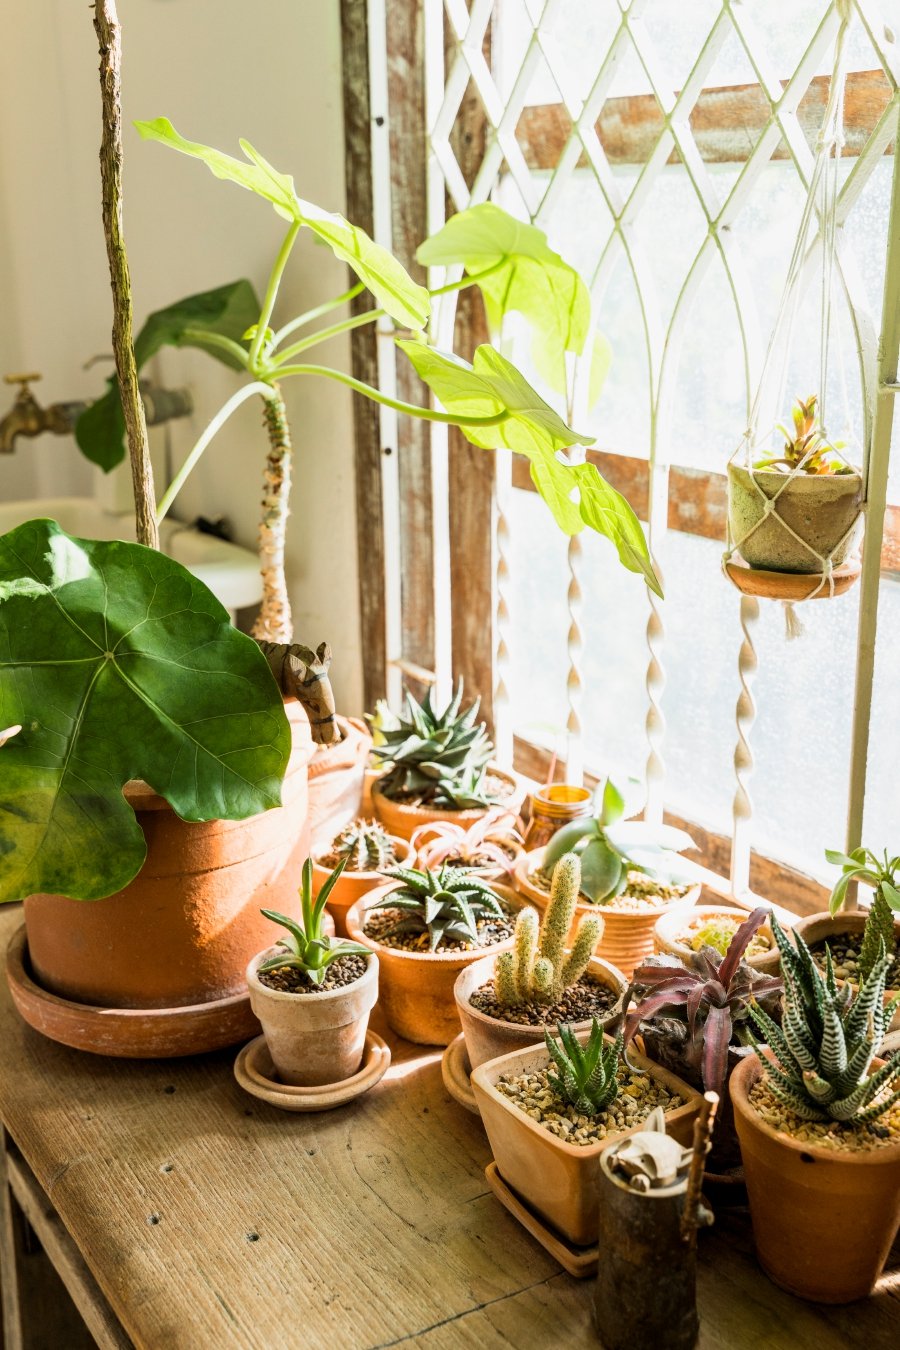 Houseplants bring a lot of joy but according to science, it’s not likely they have any real impact on indoor air quality. Photo from Freepik.